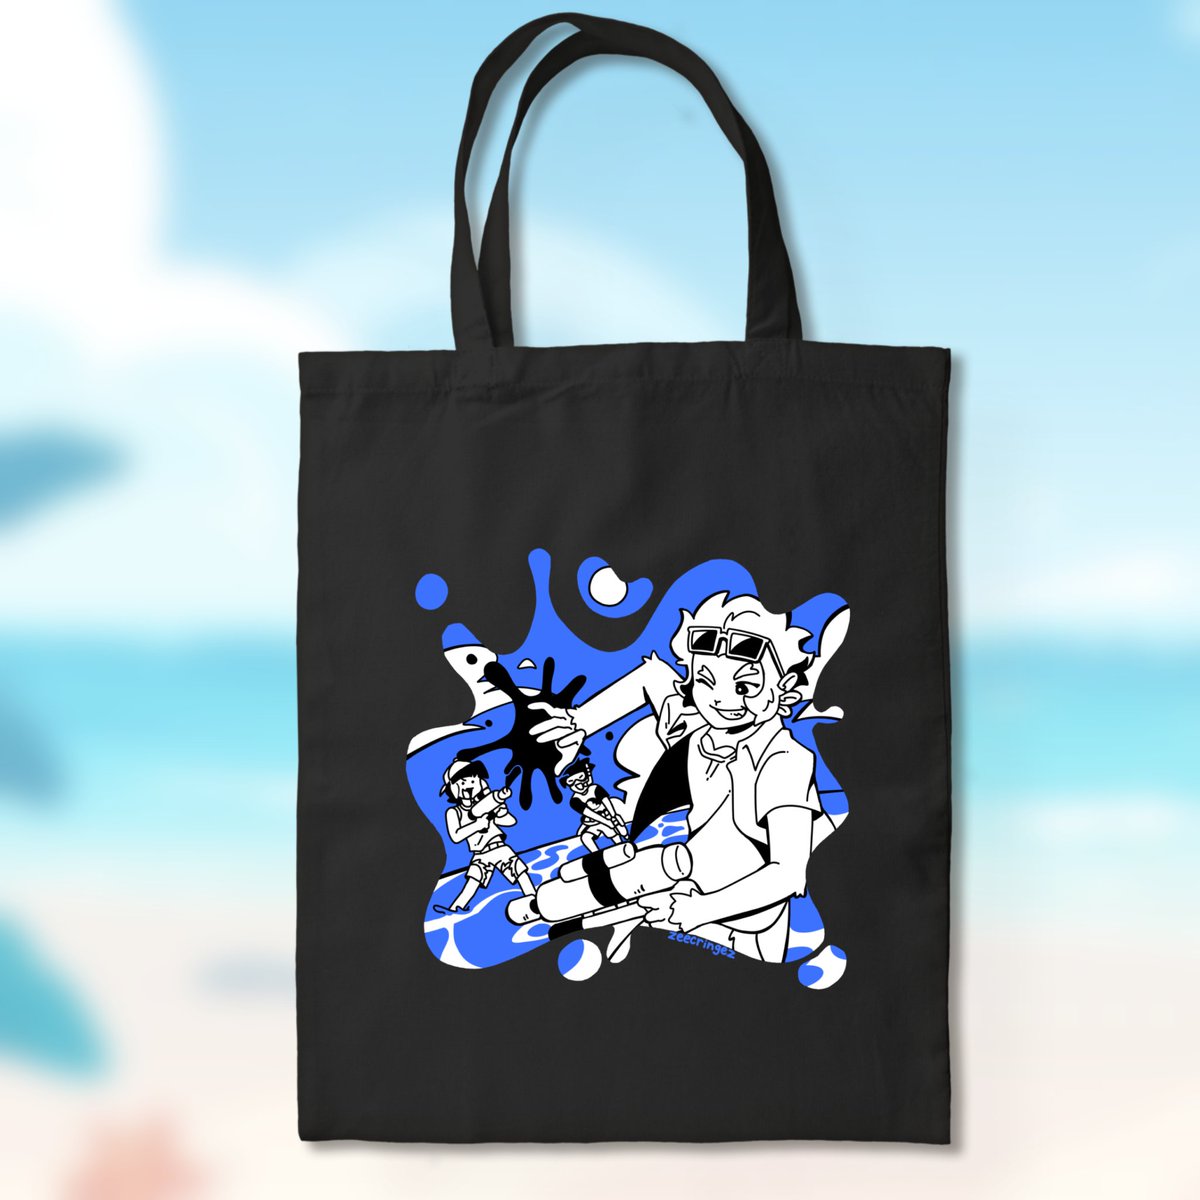 🌊LMK SUMMER TOTE BAG🌊 now available for p.o at my shop! p.o end on 10th may 🔗zeecringez.bigcartel.com/products for US order pls DM me, tyyy #lmk #monkiekid #LEGOMonkieKid